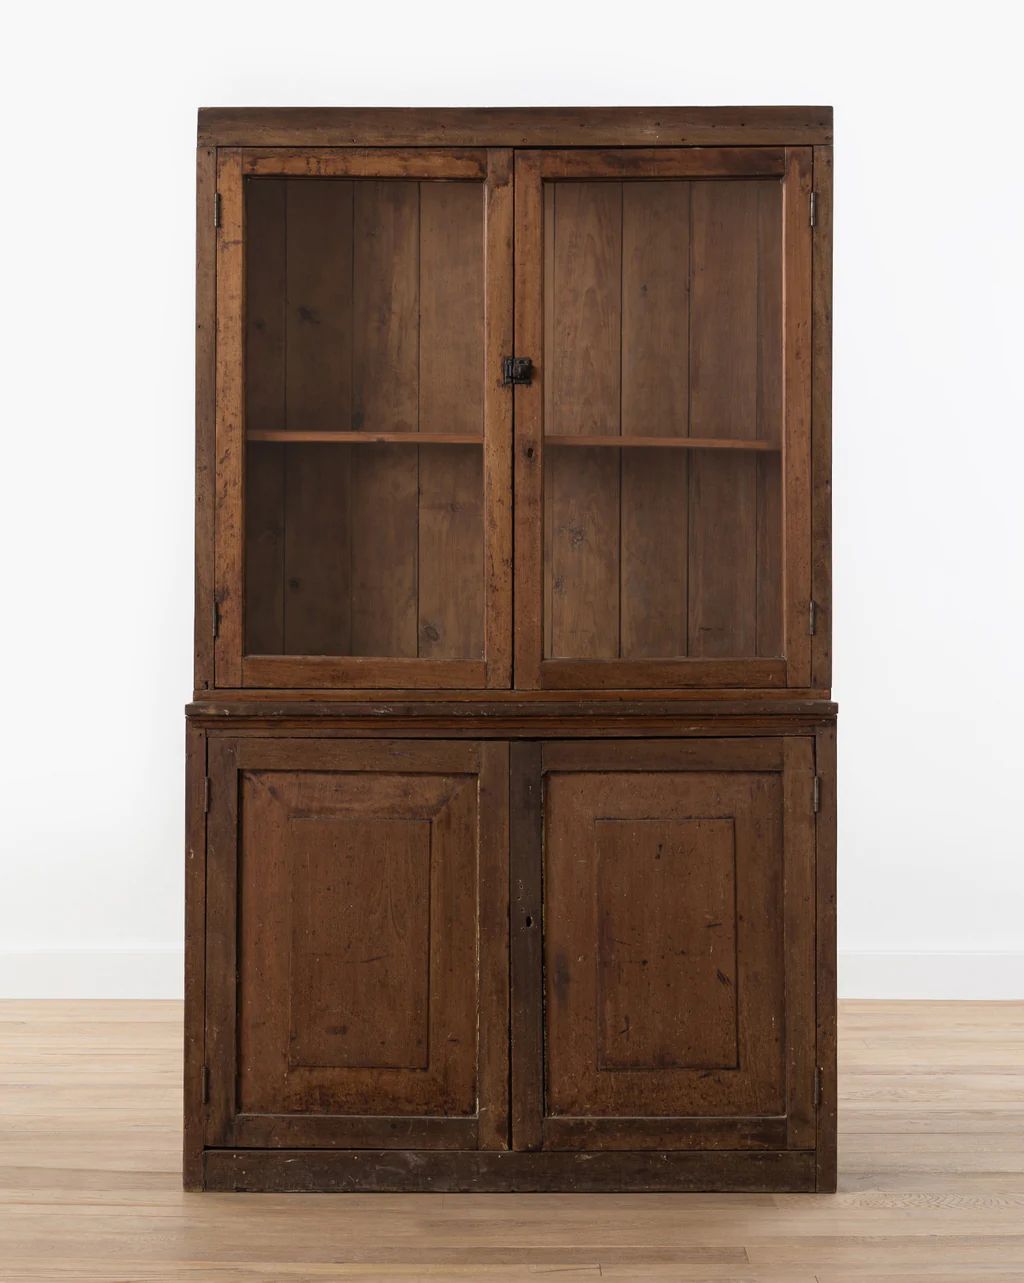 Vintage Wooden Cupboard with Step Back Upper Glass | McGee & Co.